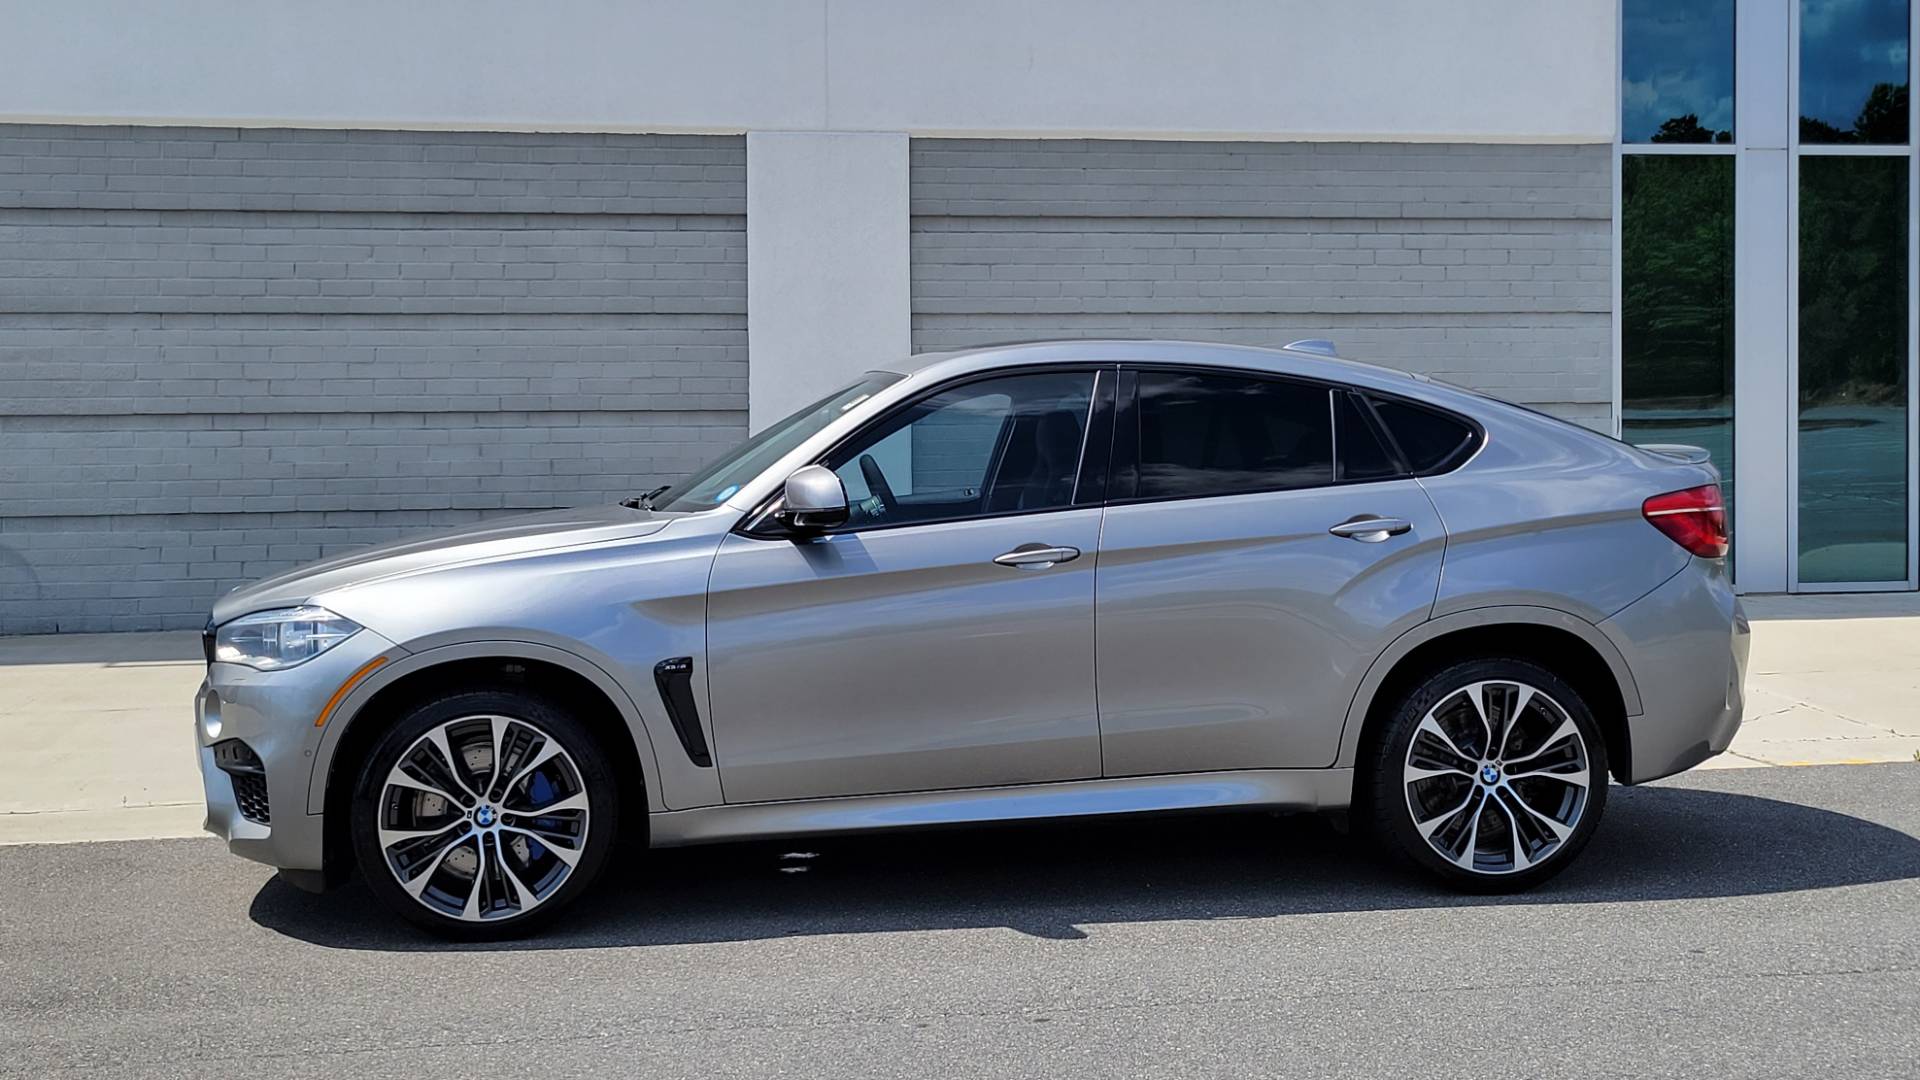 Used 2016 BMW X6 M 567HP / EXECUTIVE / DRVR ASST / PARK ASST / NAV / SUNROOF / CAMERA for sale $49,995 at Formula Imports in Charlotte NC 28227 4